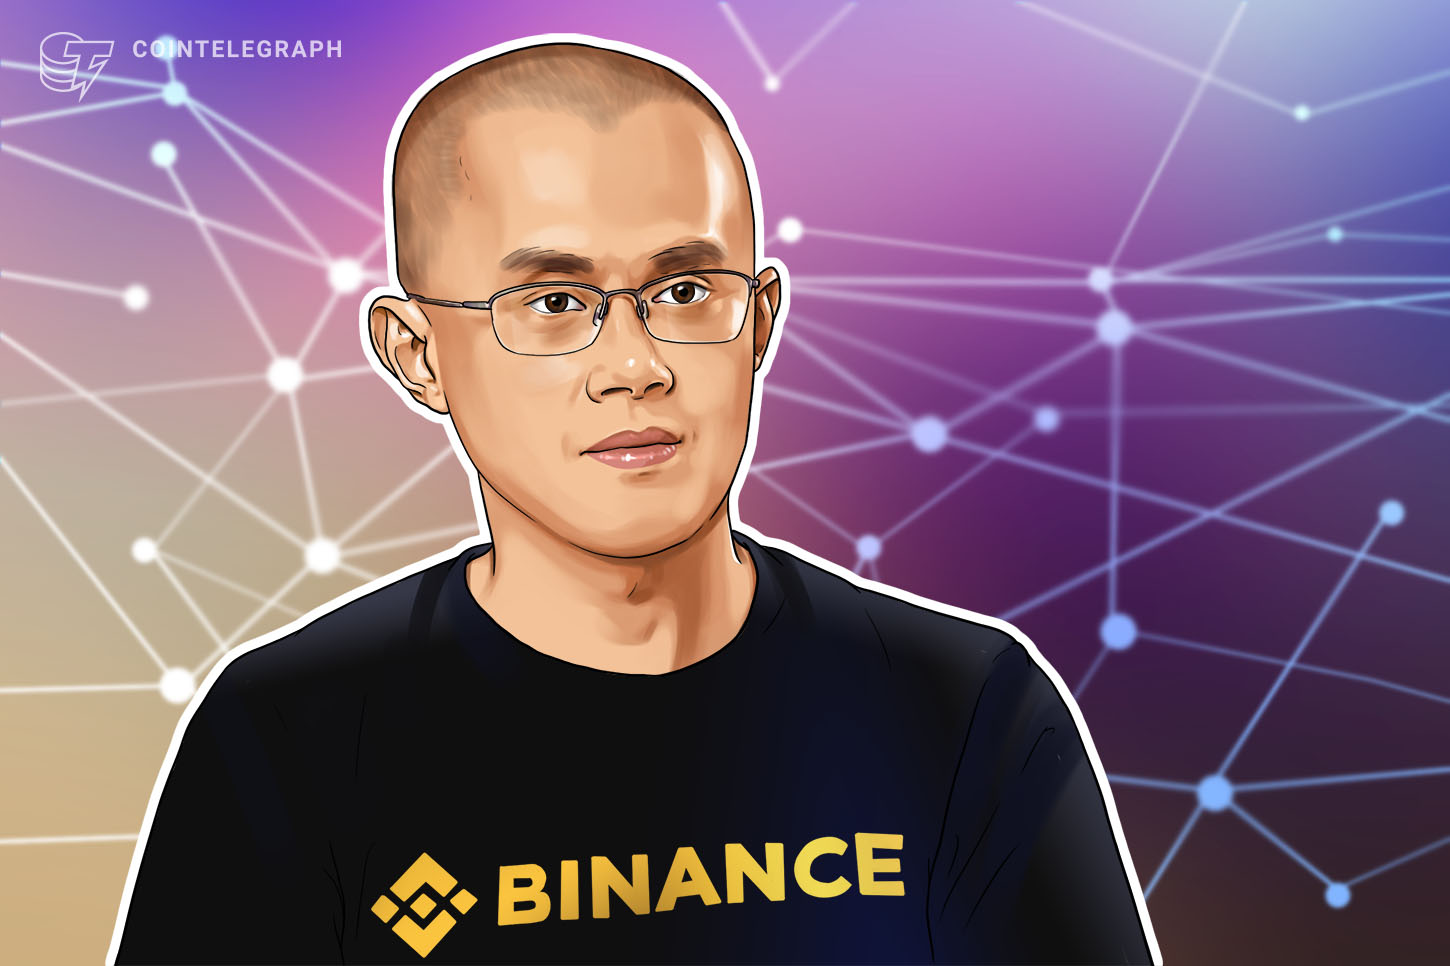 Binance CEO responds to Forbes claims: ‘They don’t know how an exchange works’